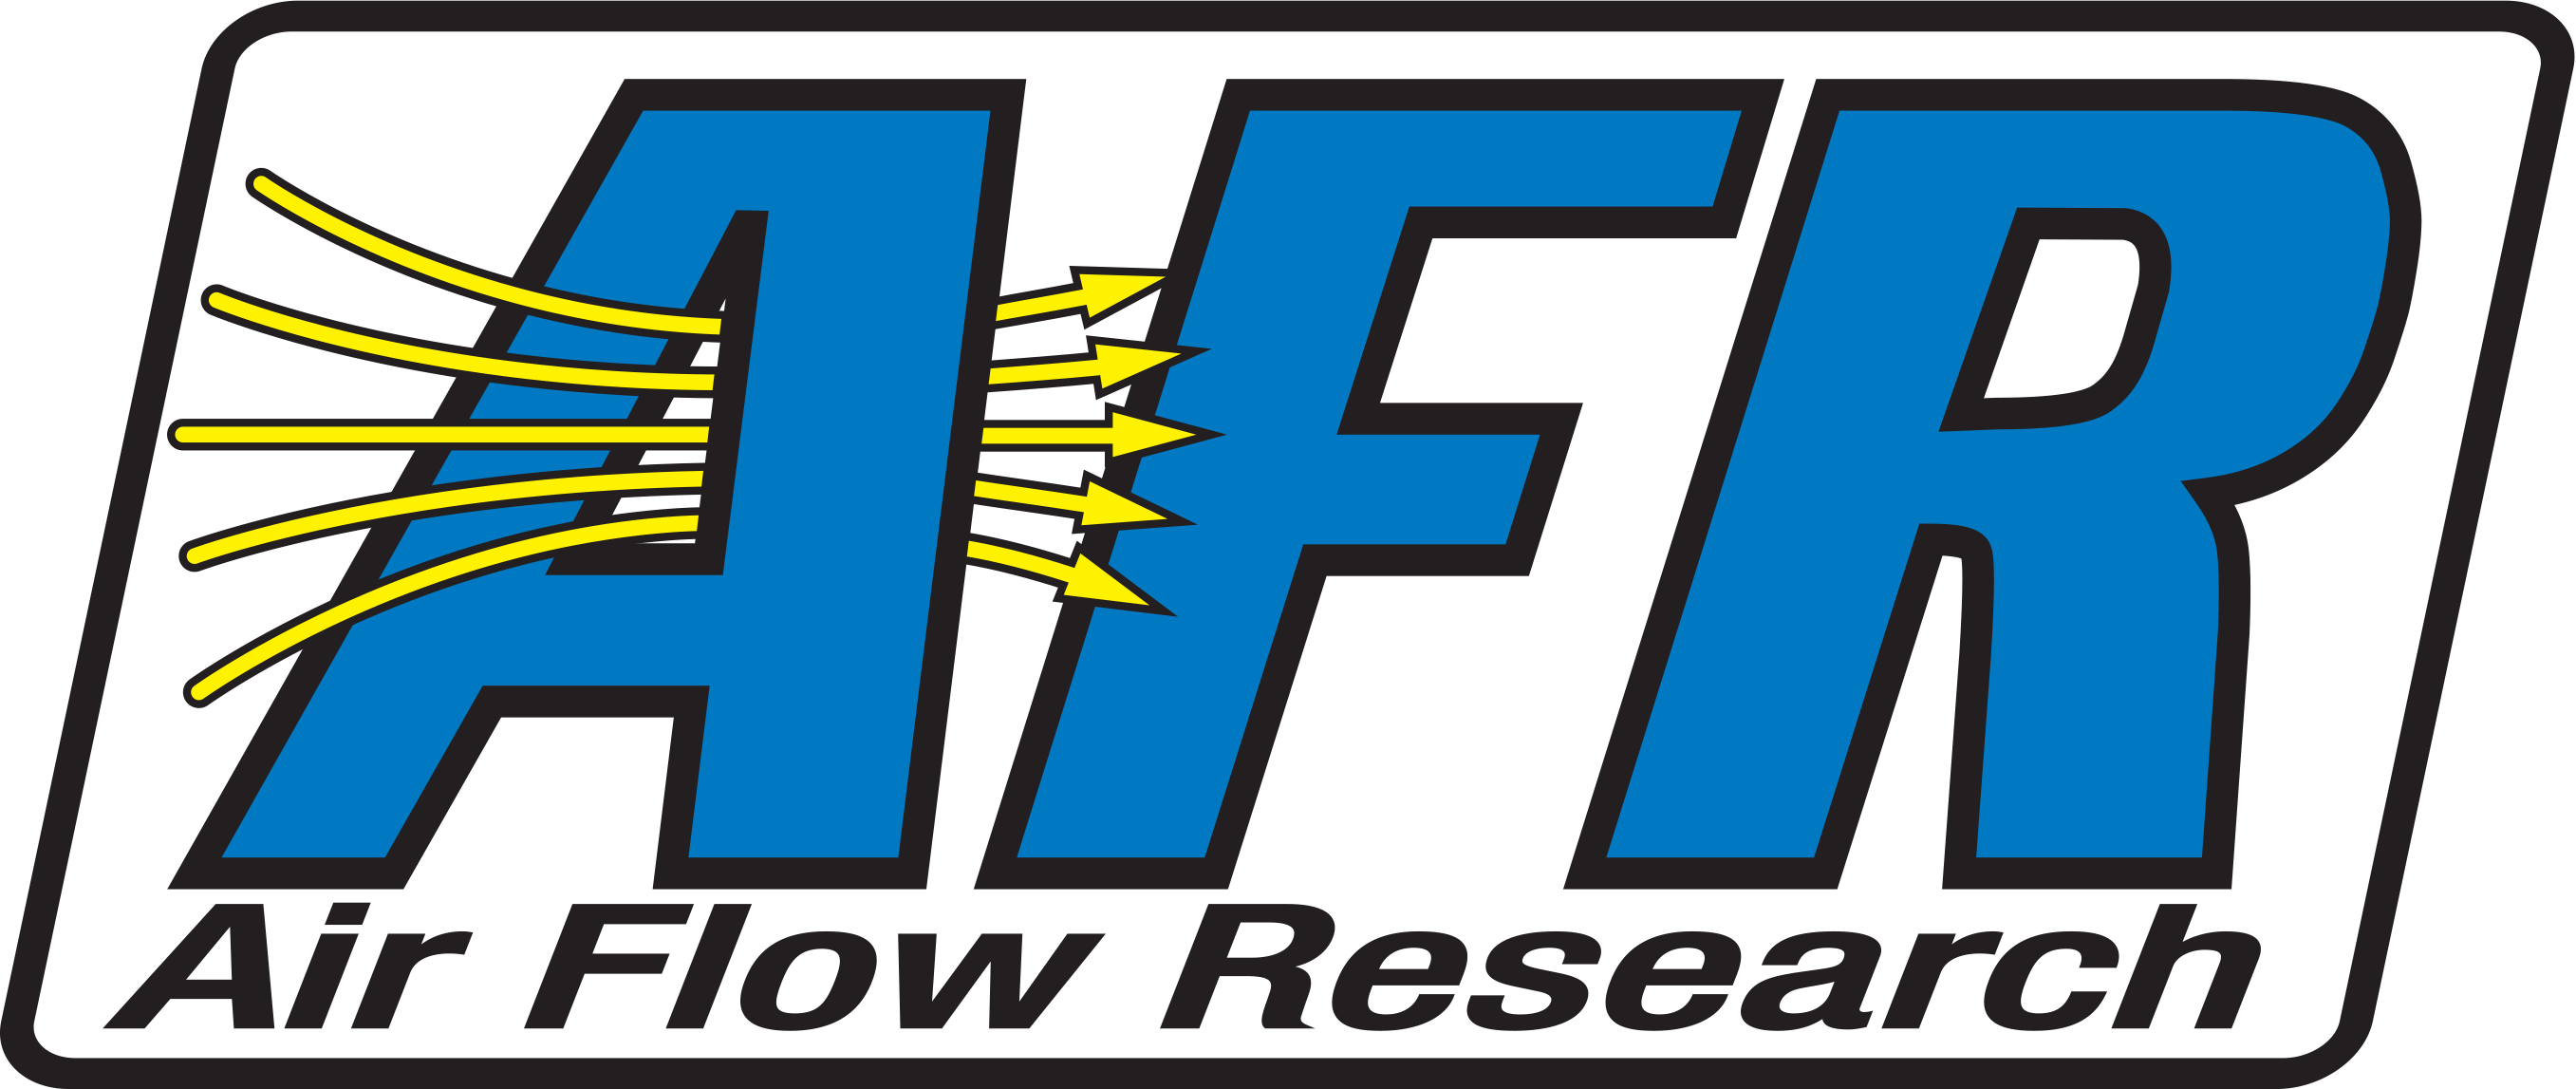 Air Flow Research (9699) Apparel/Promotional